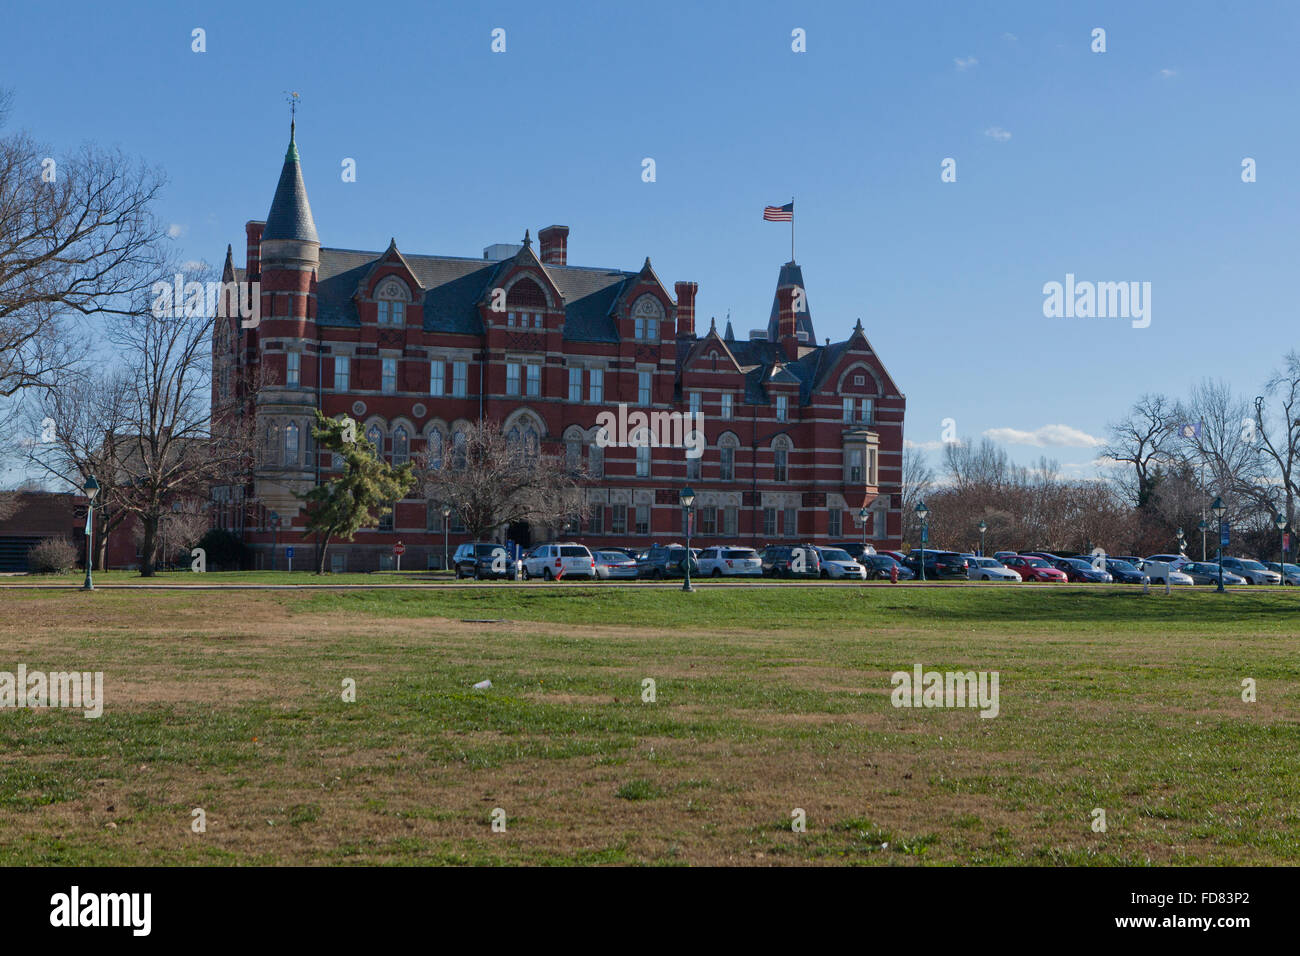 Gallaudet University for the Deaf and Hard of Hearing College Hall building - Washington, DC USA Stock Photo